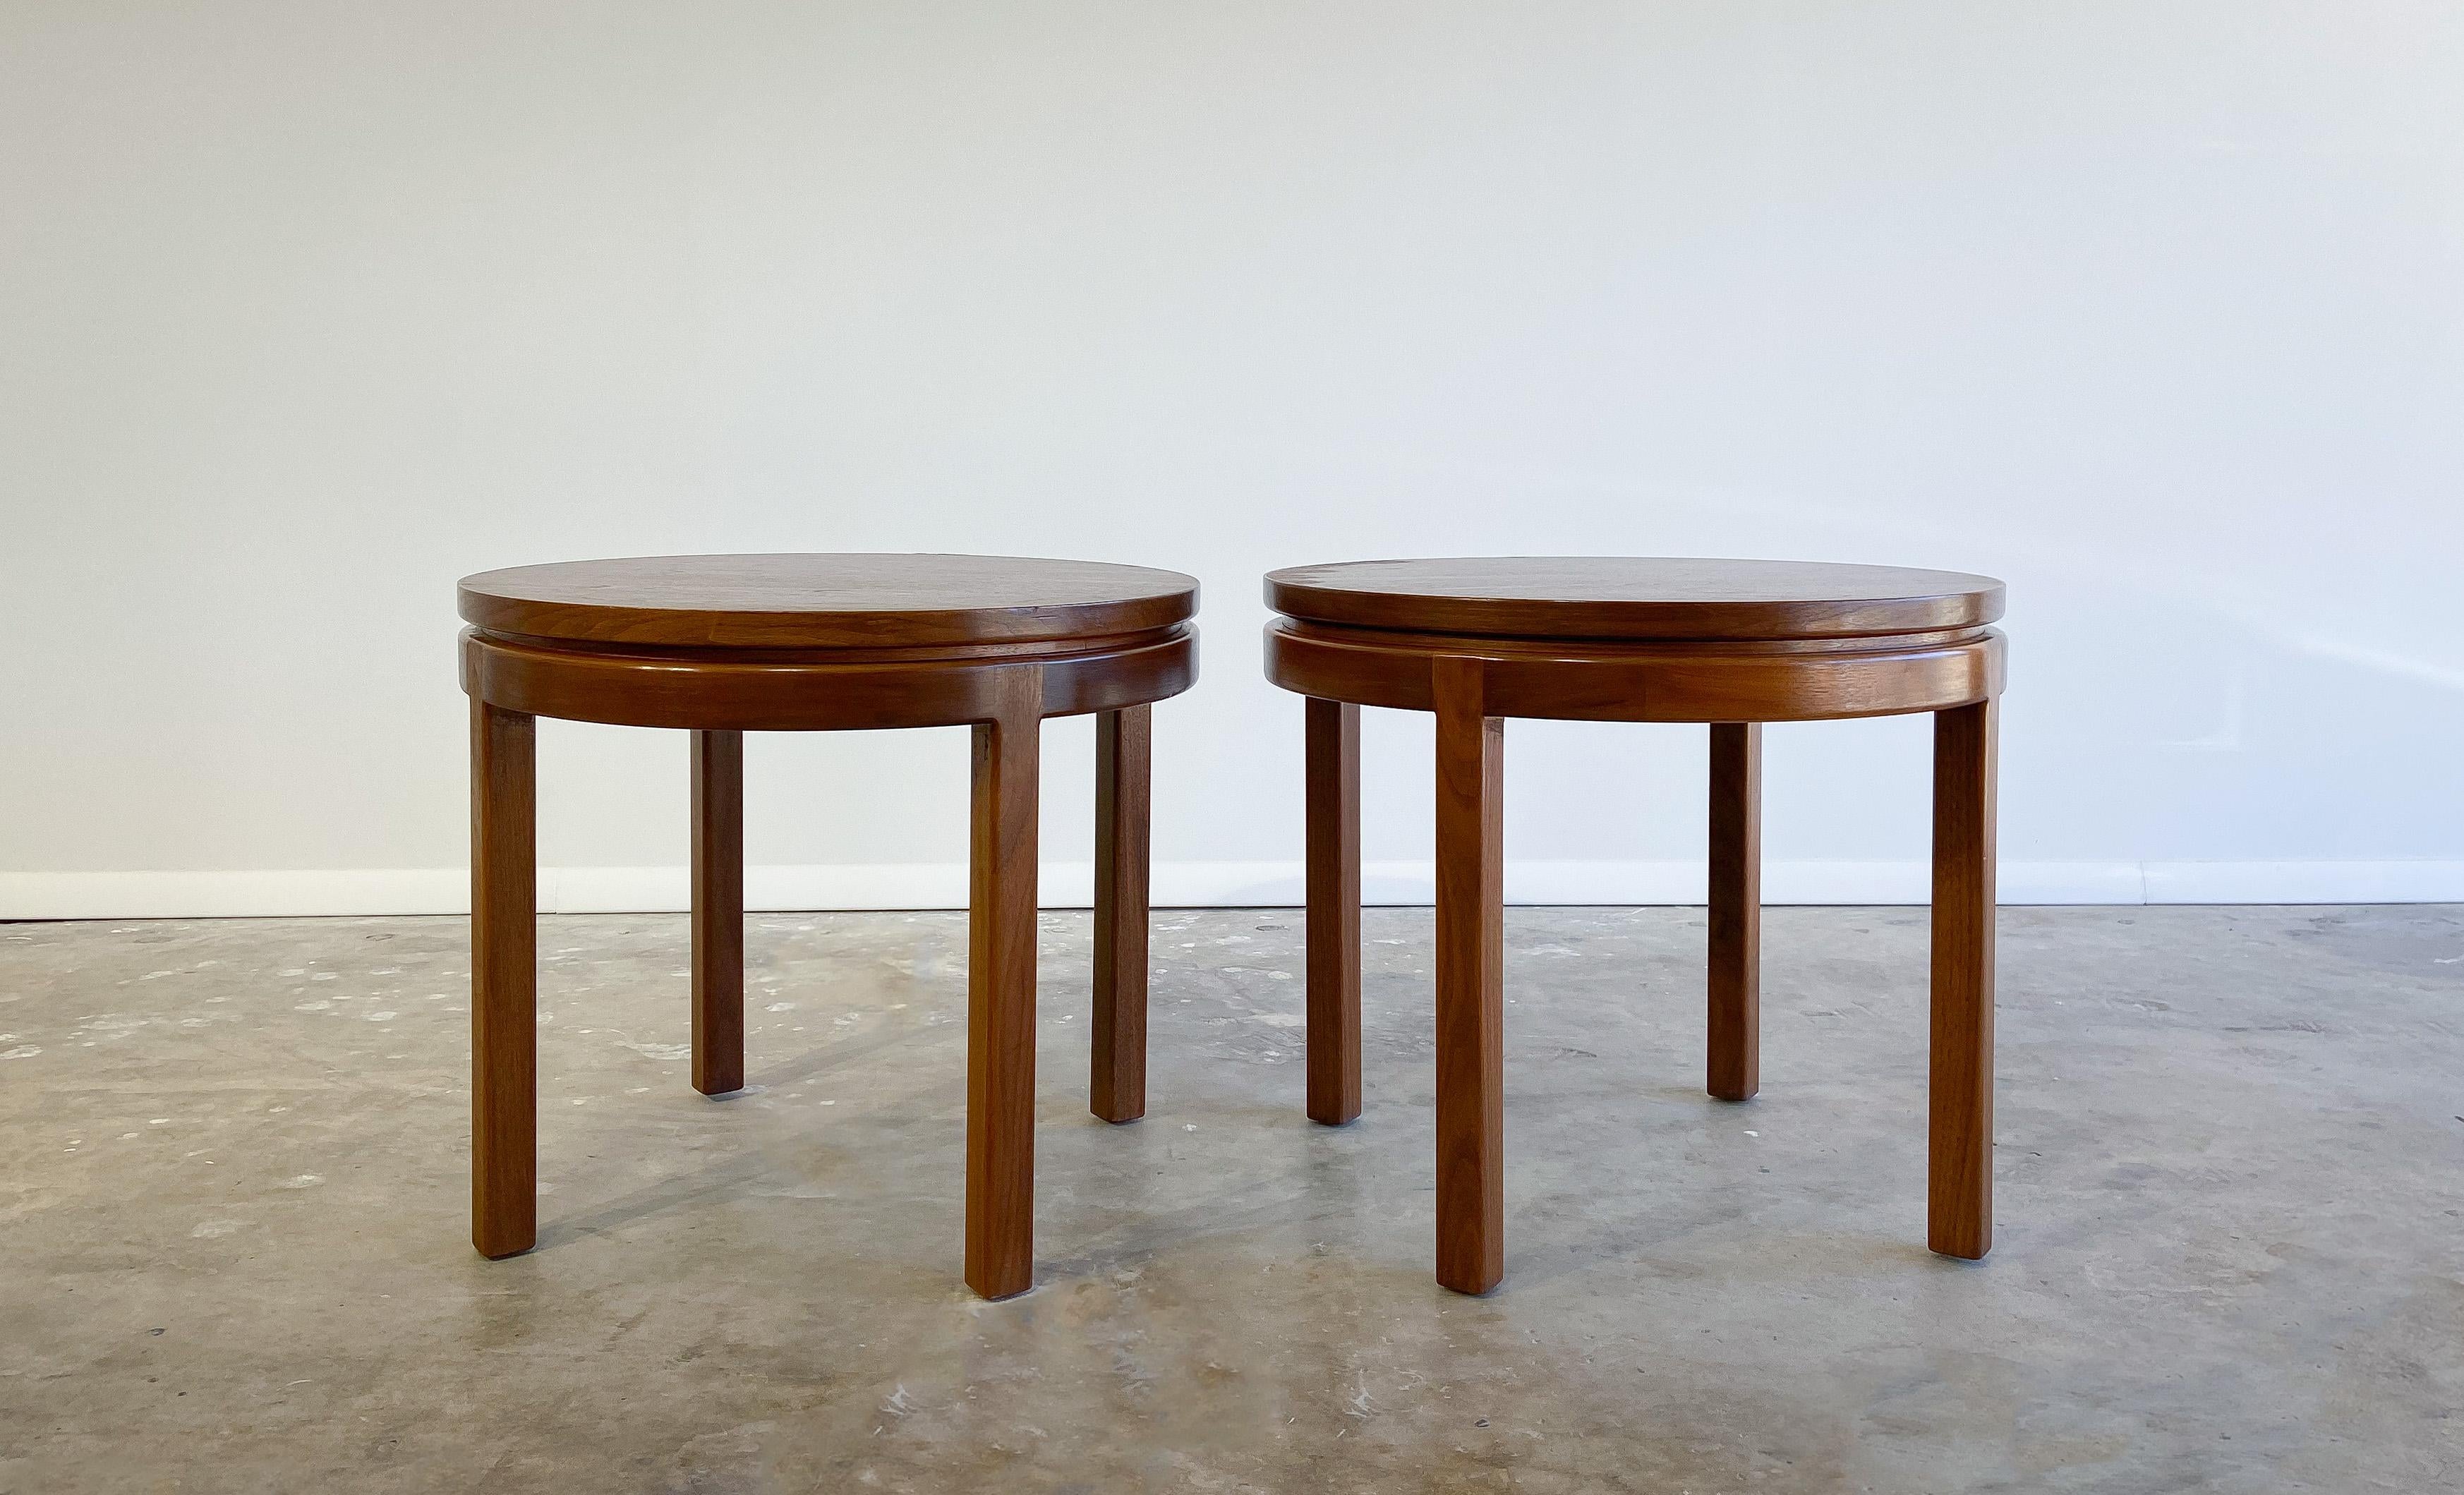 American Walnut Side or End Tables in the manner of Edward Wormley for Dunbar, 1960's For Sale